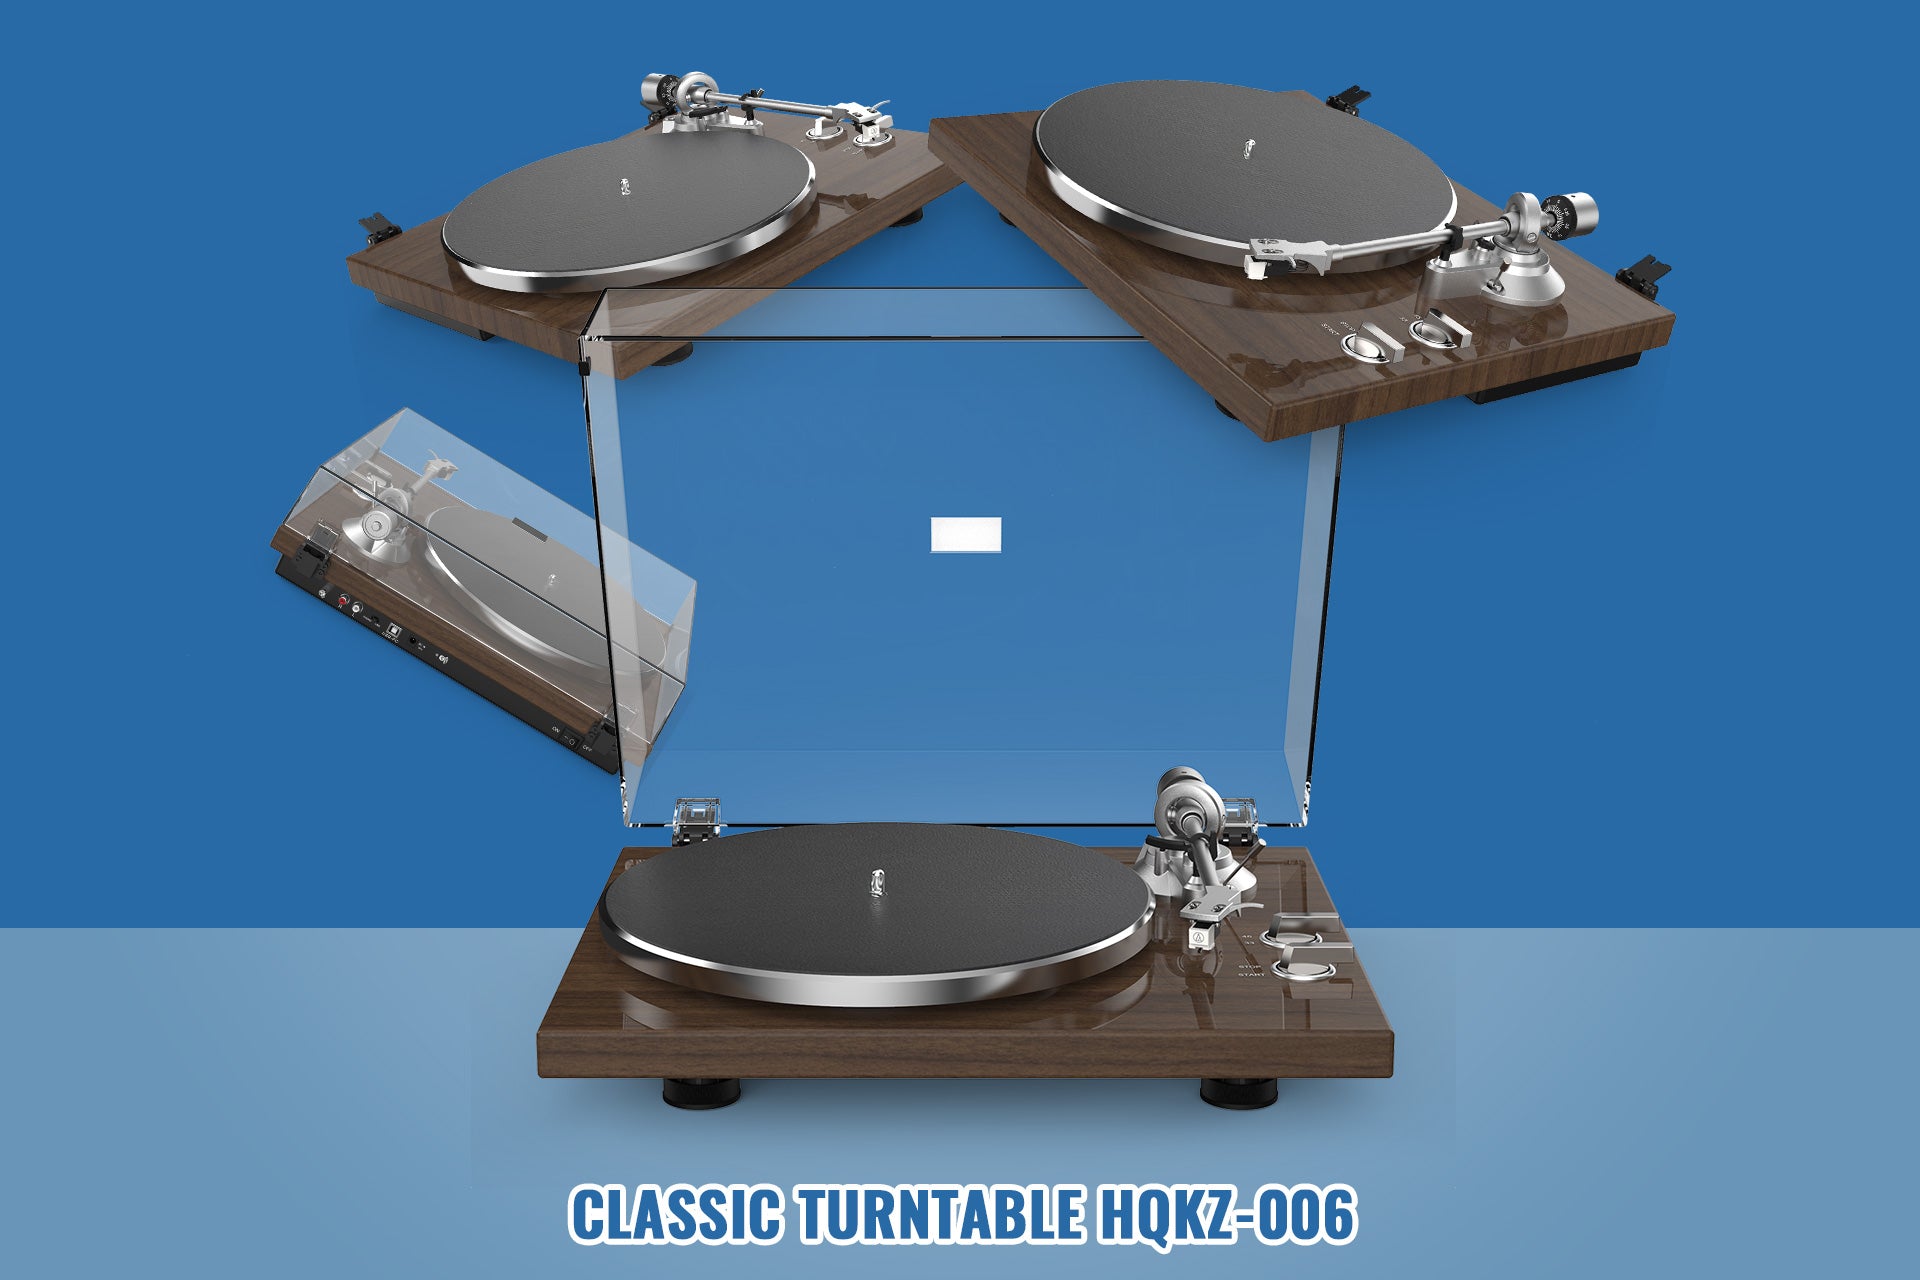 Learn About Audio Keeper‘s Classic Turntable HQKZ-006